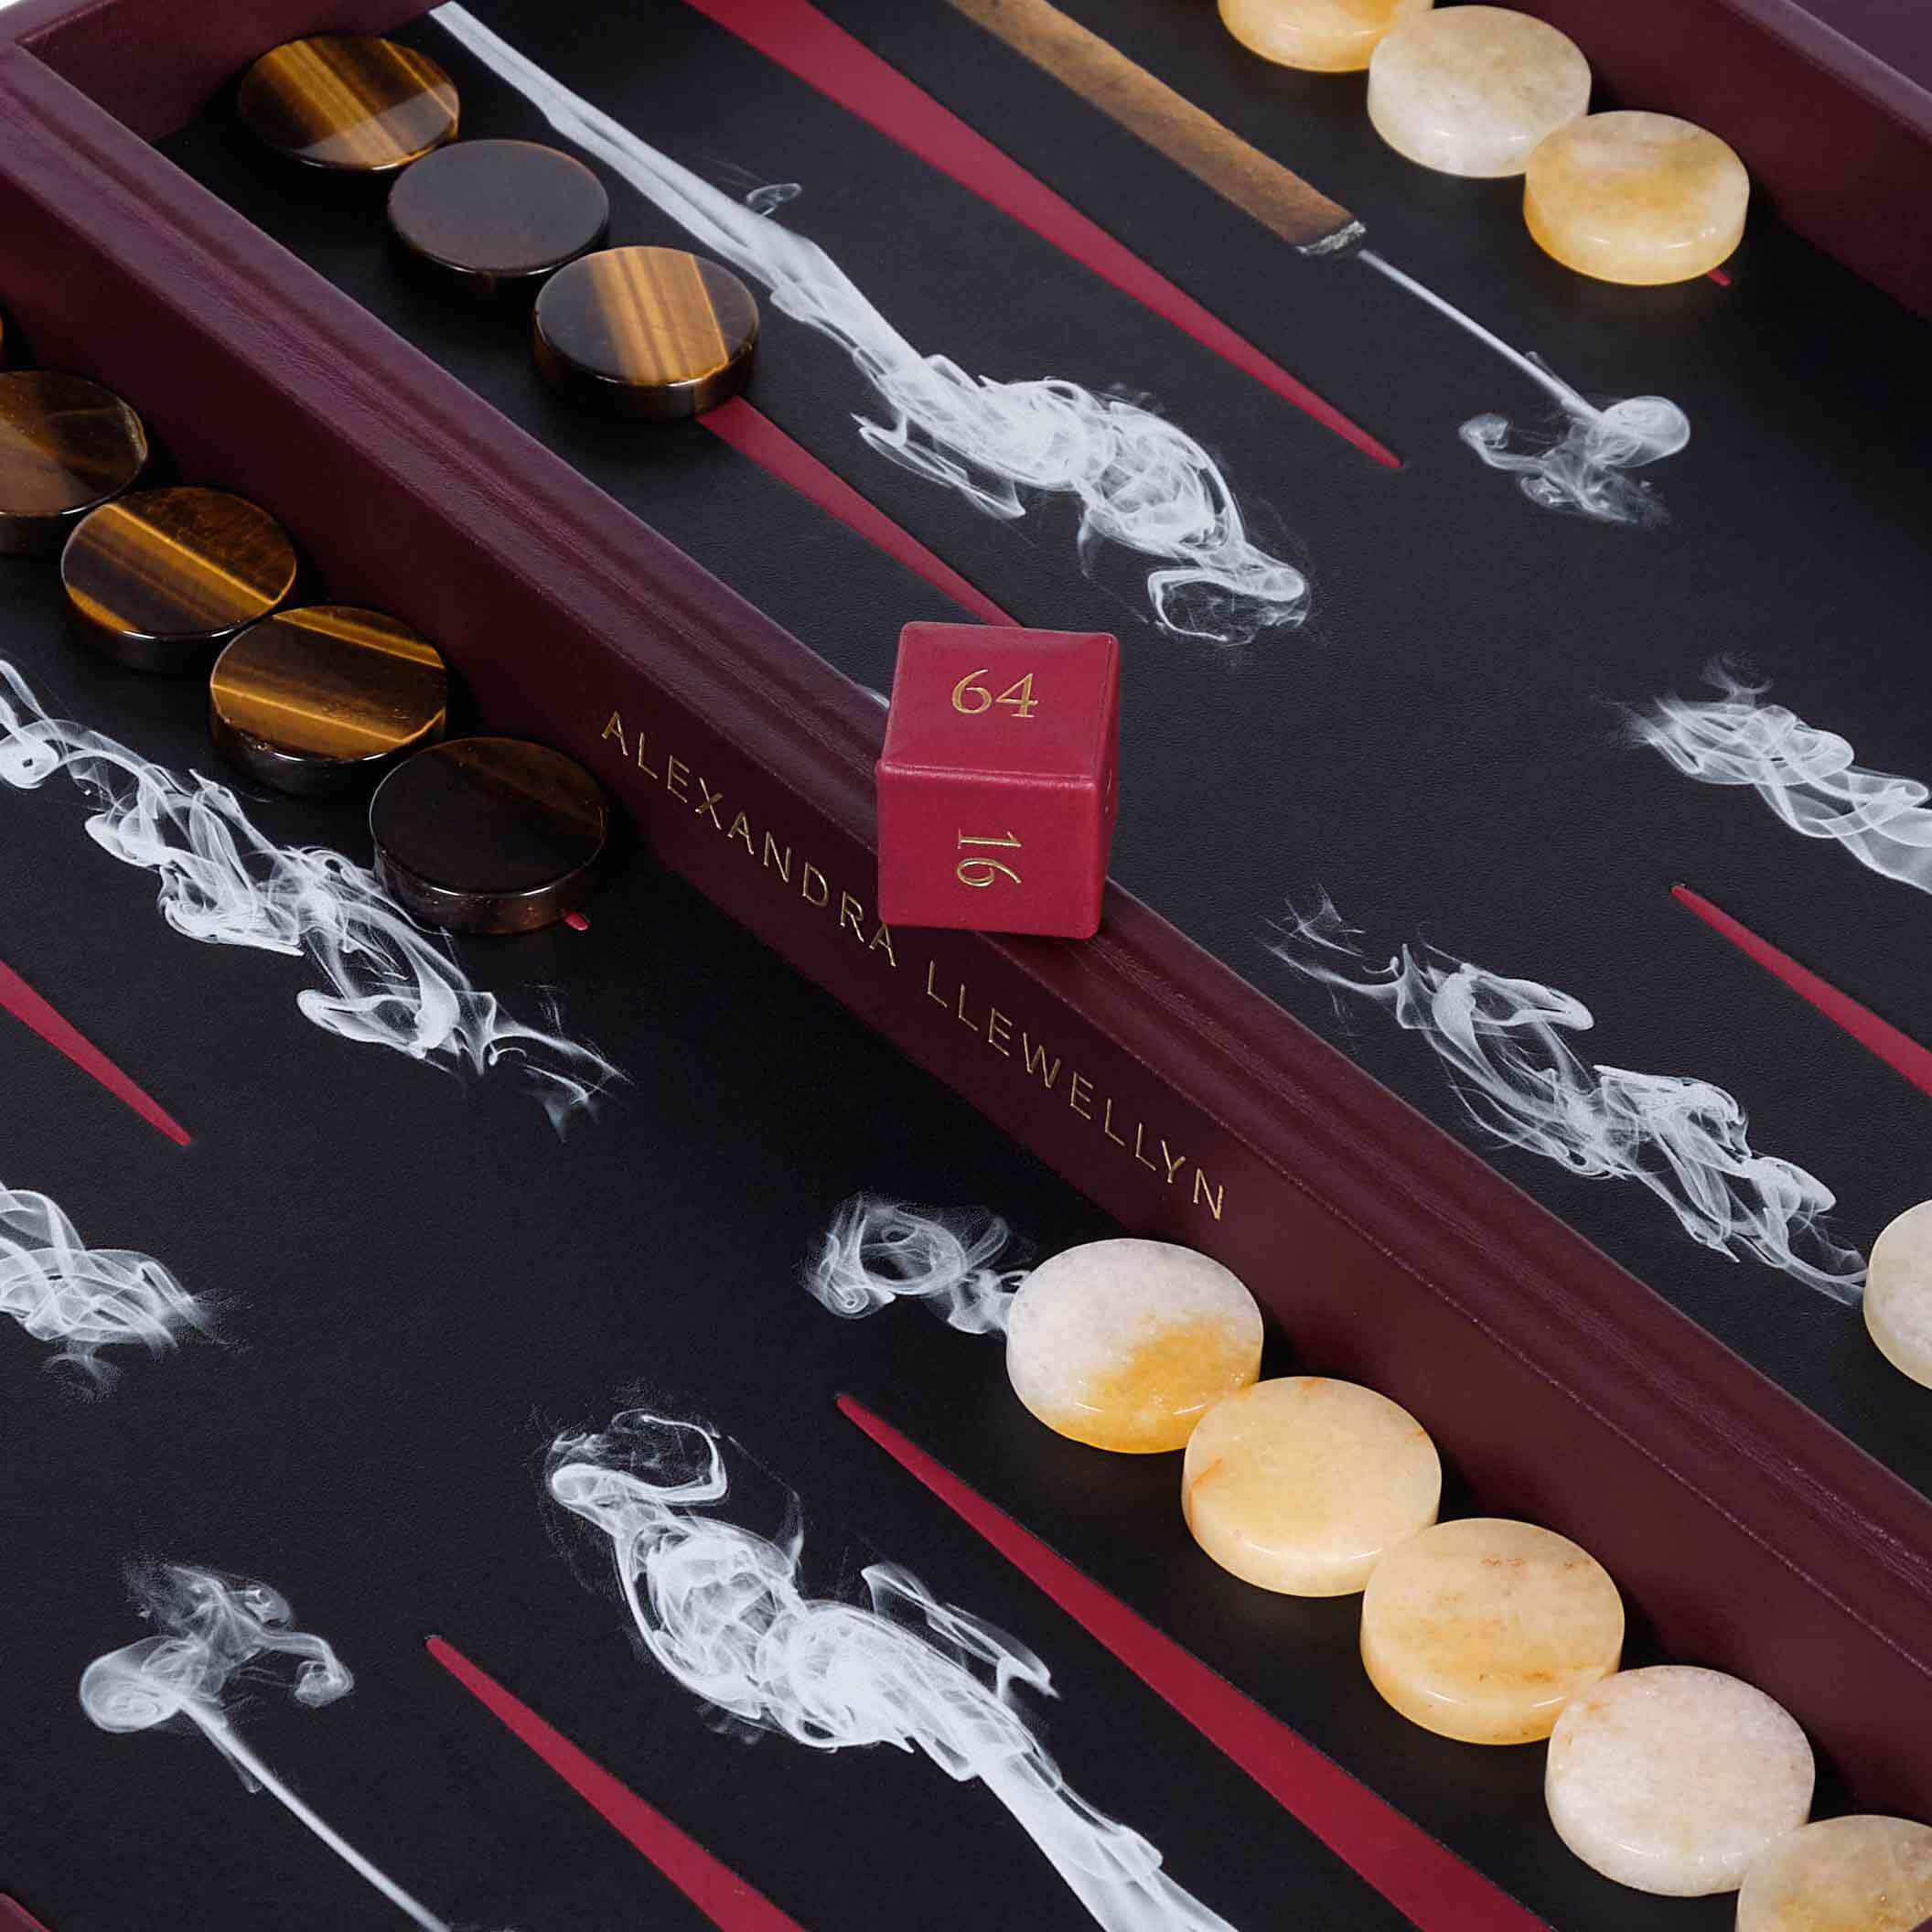 Cigar Travel Backgammon playing surface in detail